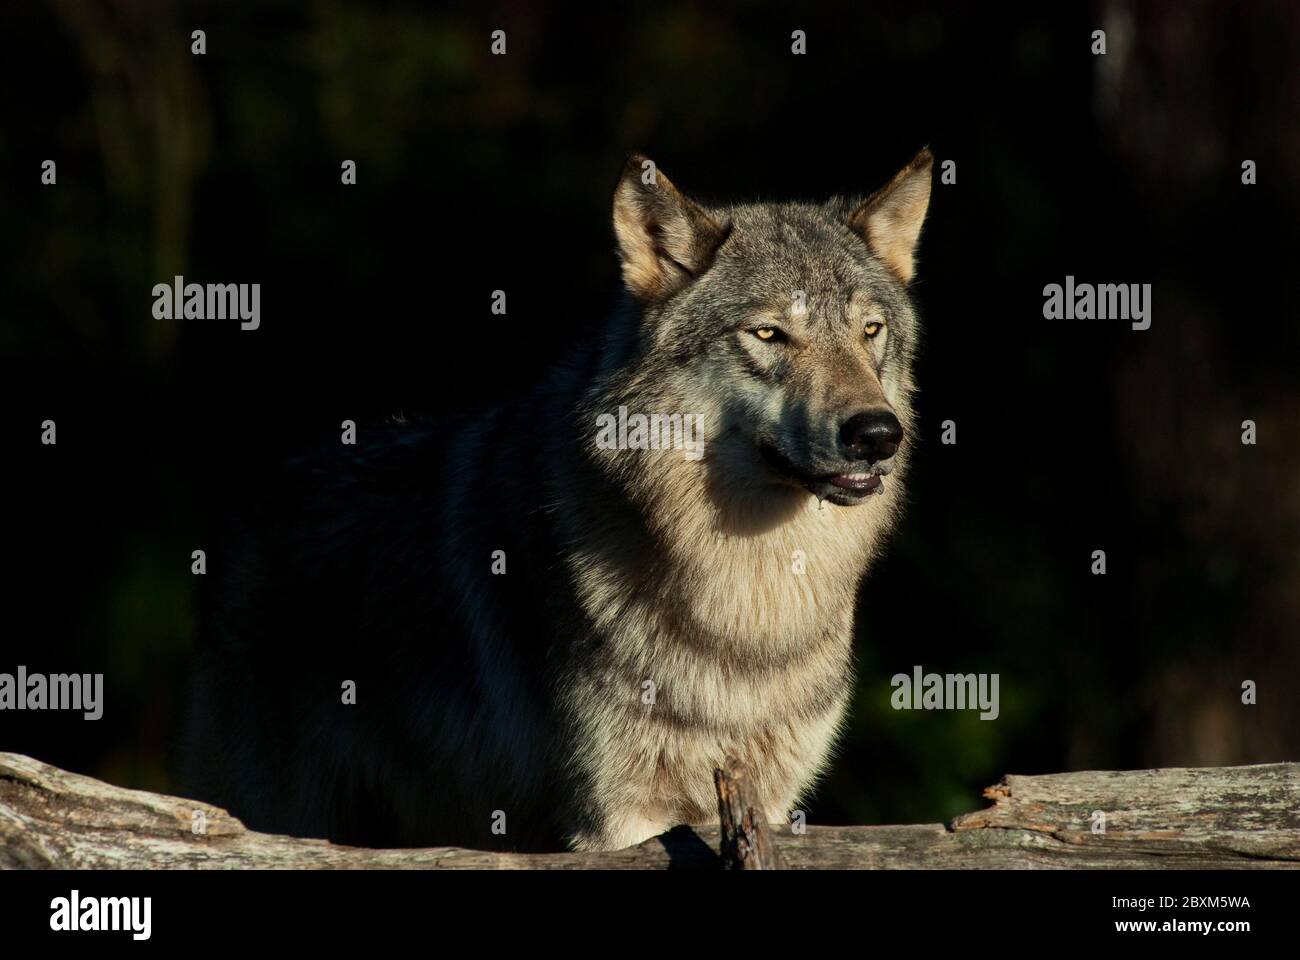 Close Up of a Timber Wolf (also known as a Gray or Grey Wolf) standing in the sun against a dark background Stock Photo